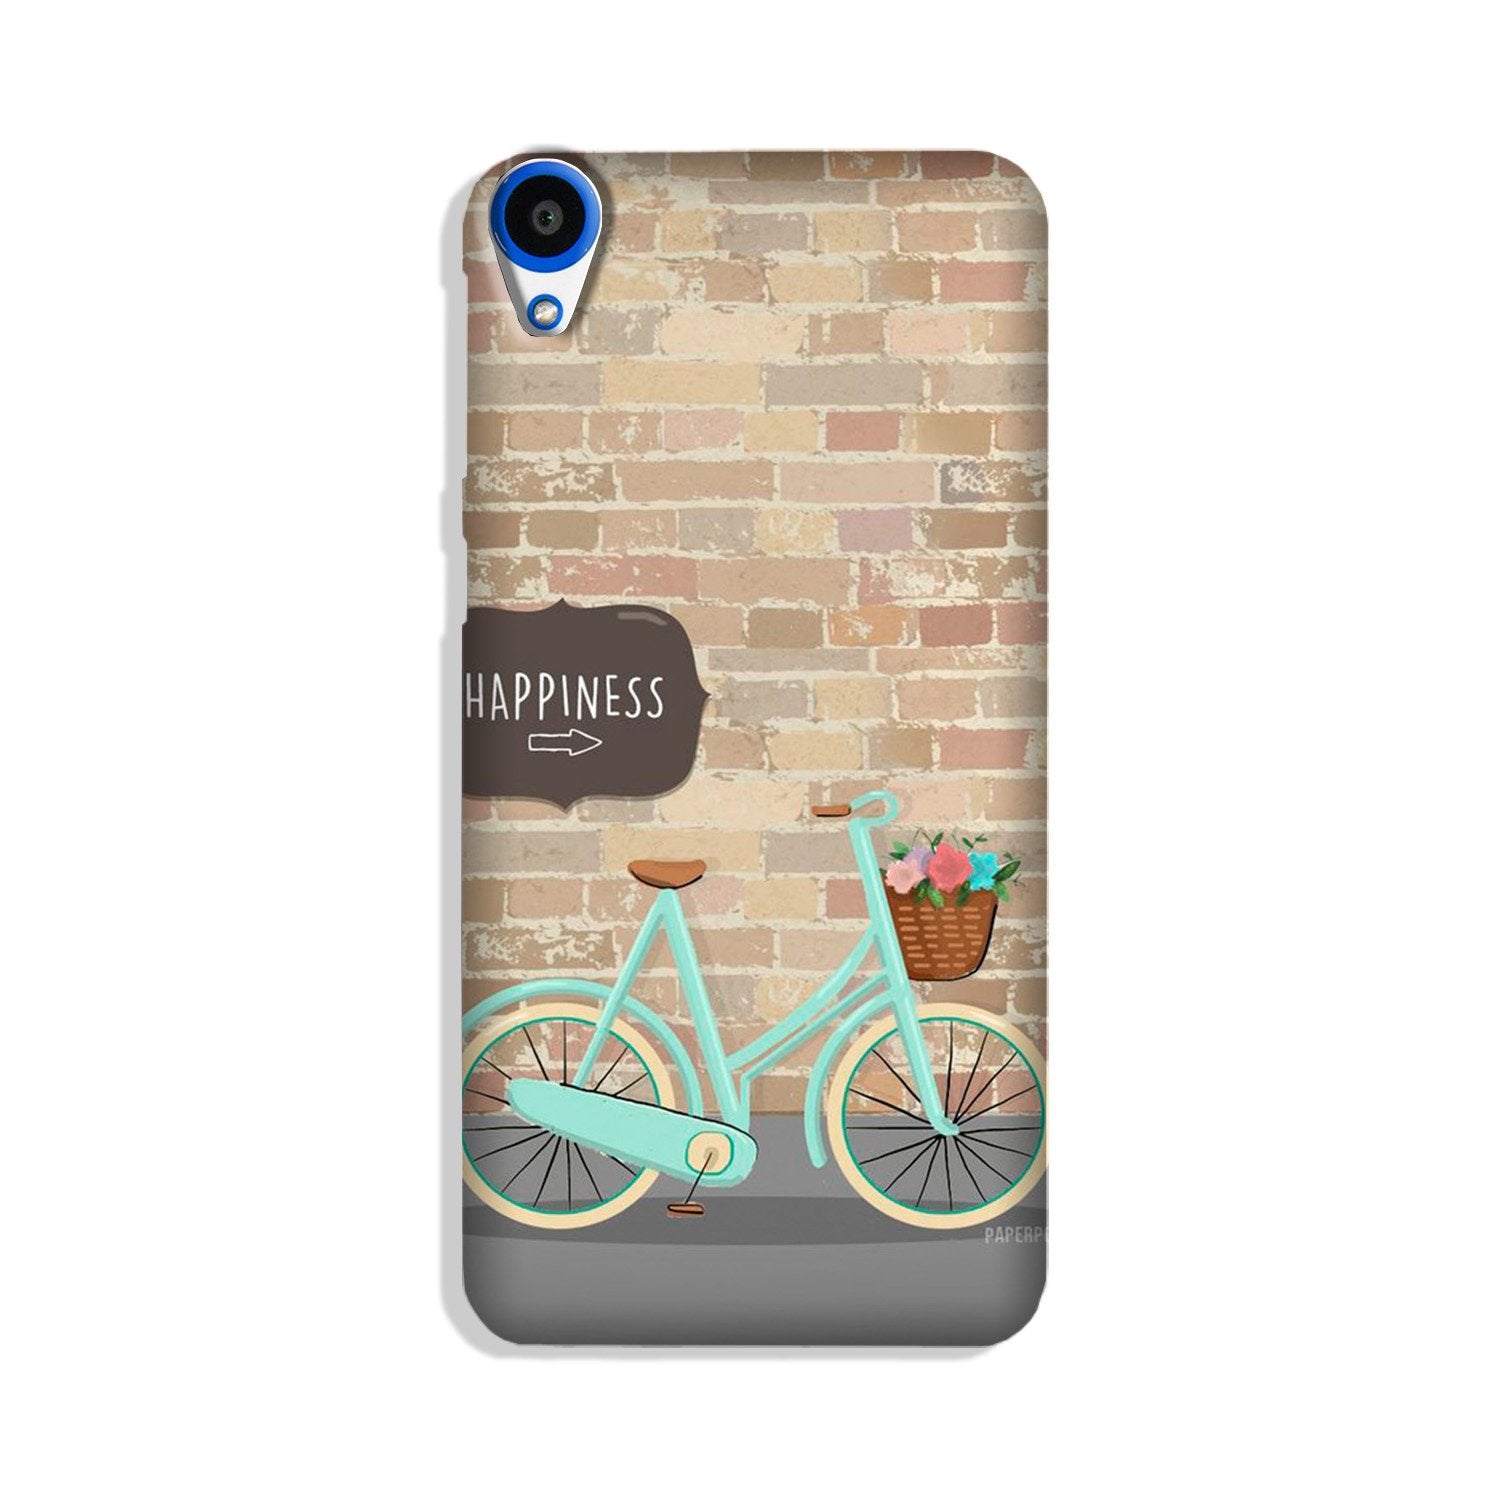 Happiness Case for HTC Desire 820